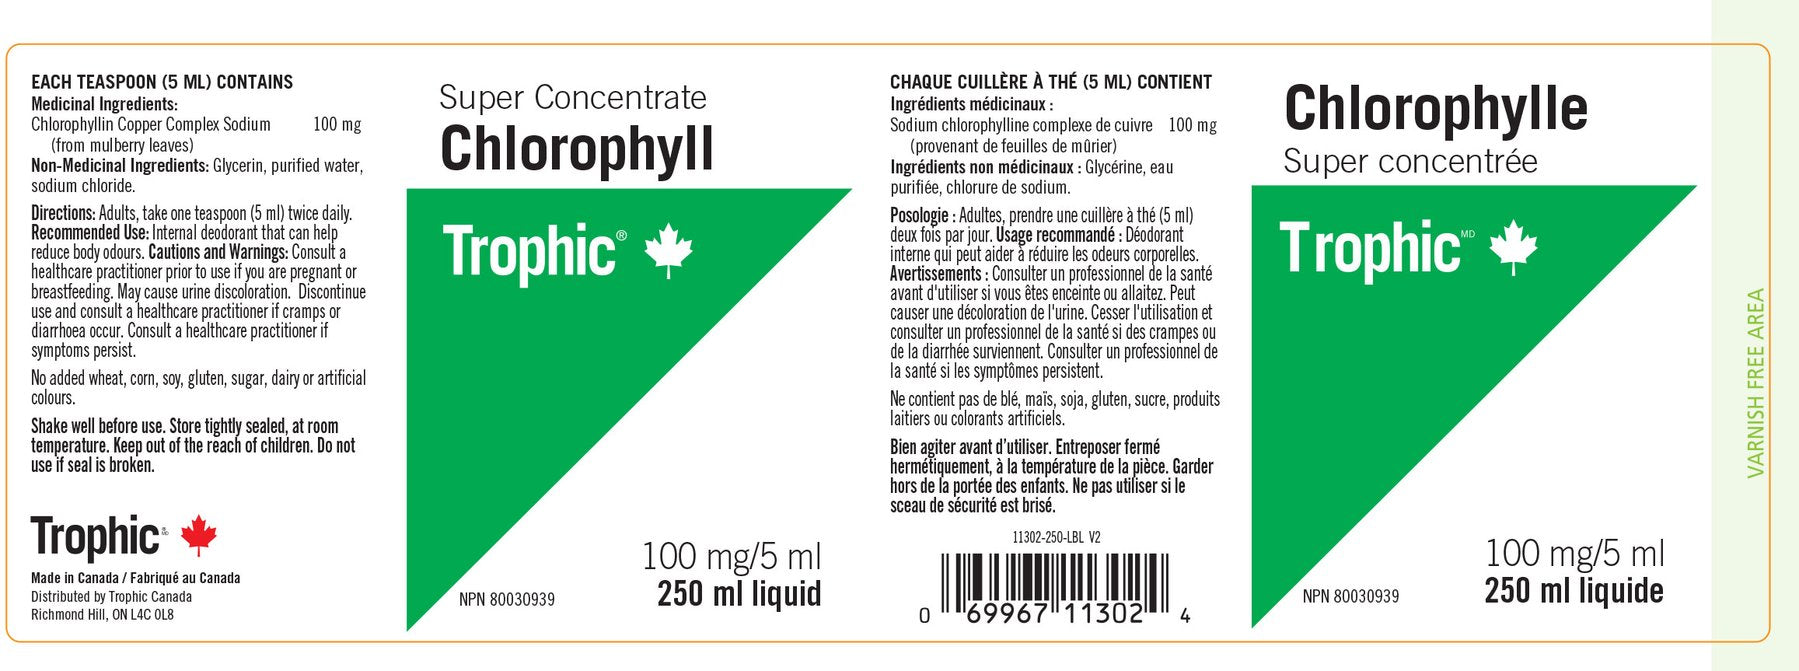 Trophic Chlorophyll Super Concentrate (250ml) - Lifestyle Markets